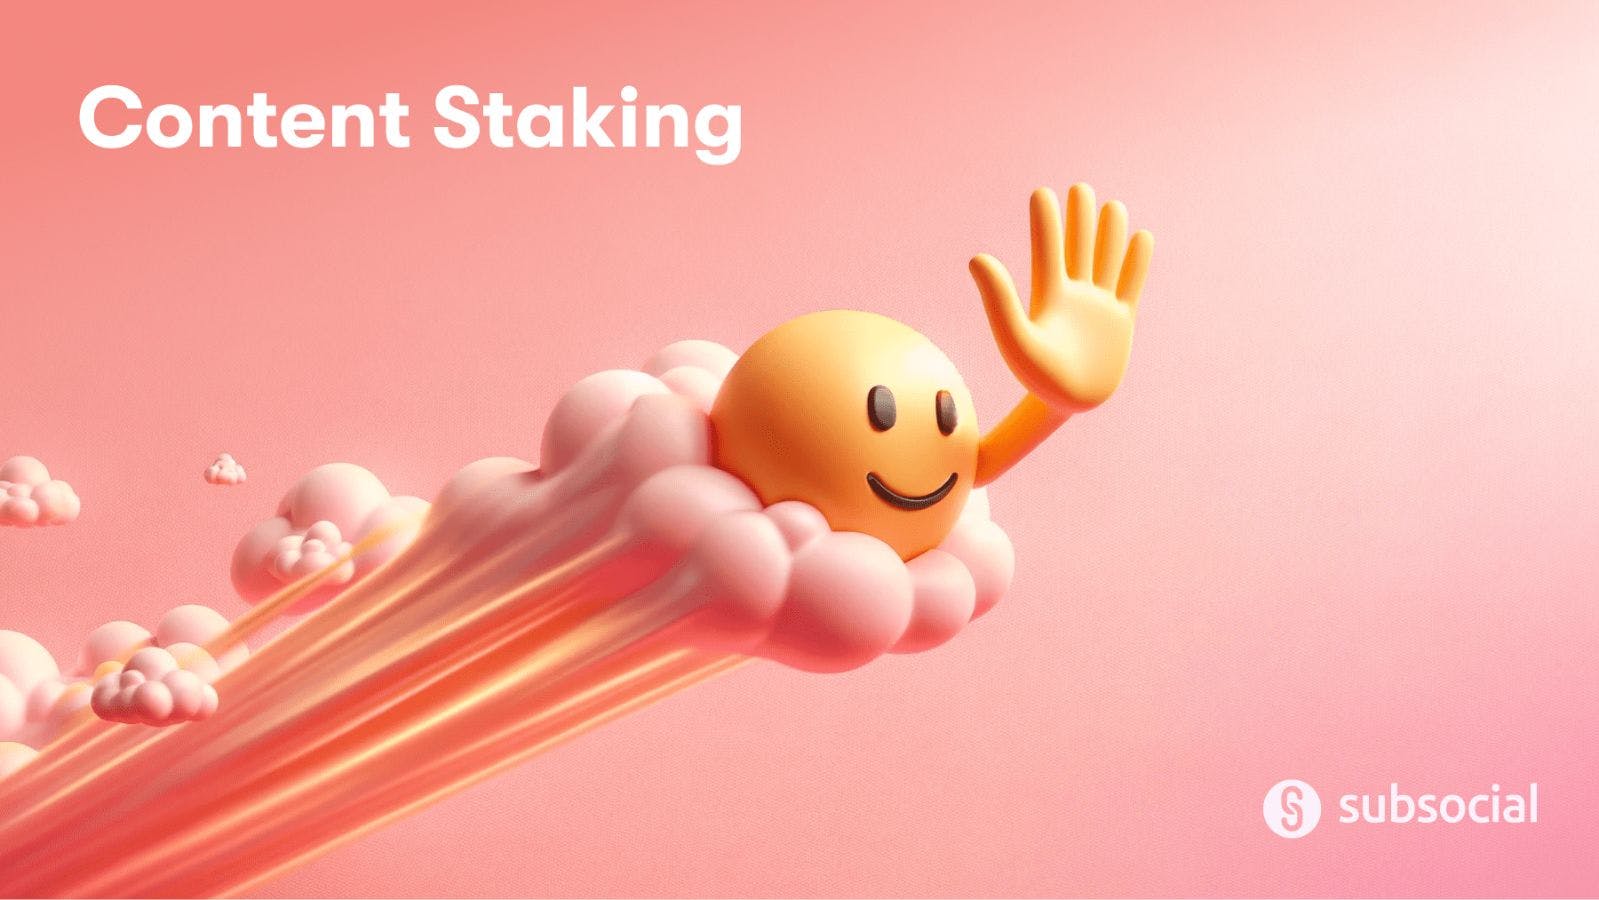 Say Goodbye To Lazy & Active Staking, And Hello To Content Staking